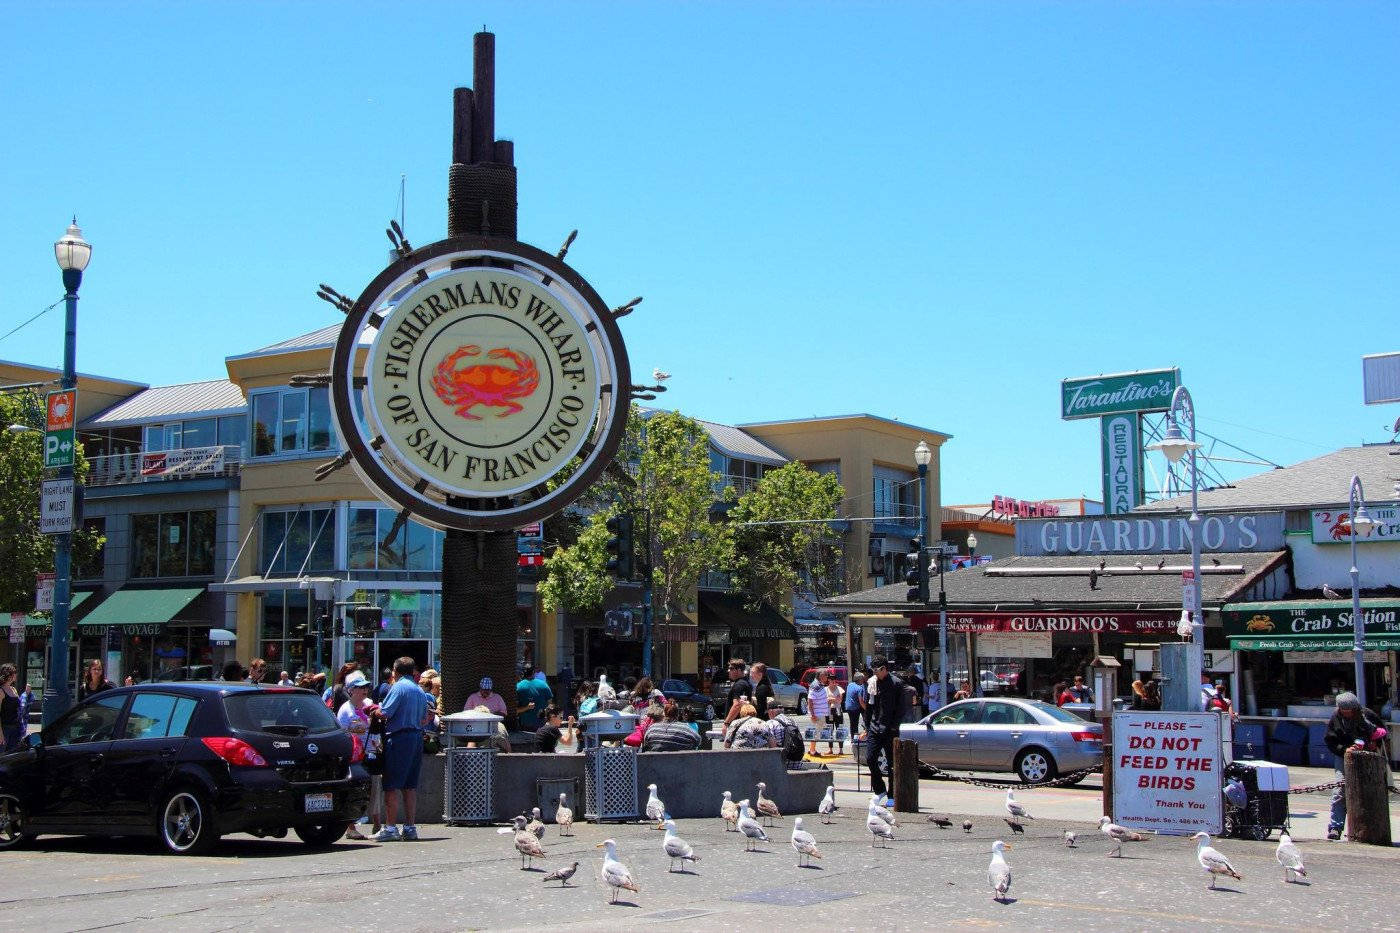 Seagulls By Fishermans Wharf Sign Wallpaper